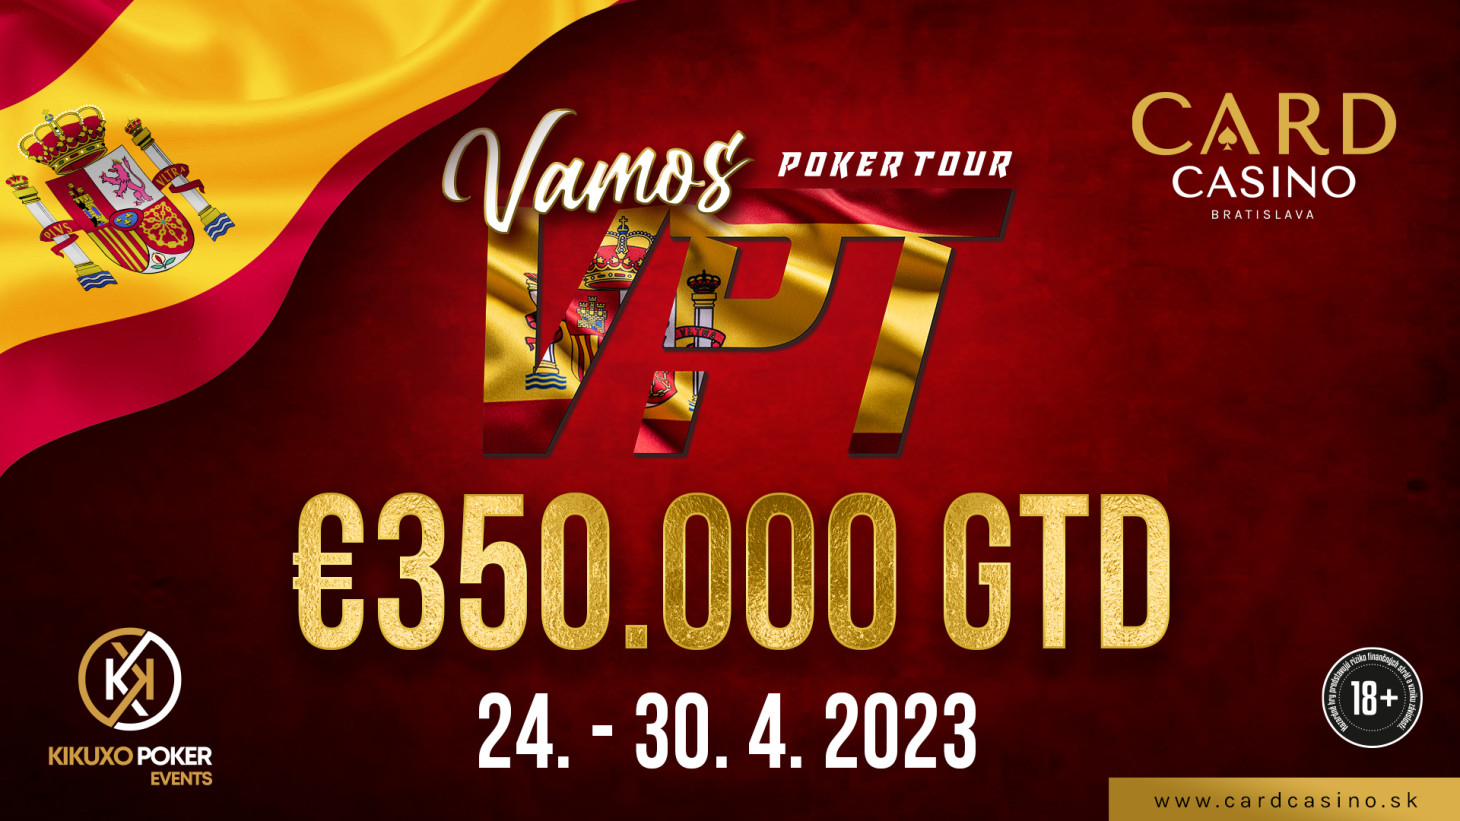 Spanish VPT tunes up for WPT Worlds in April with €350,000.